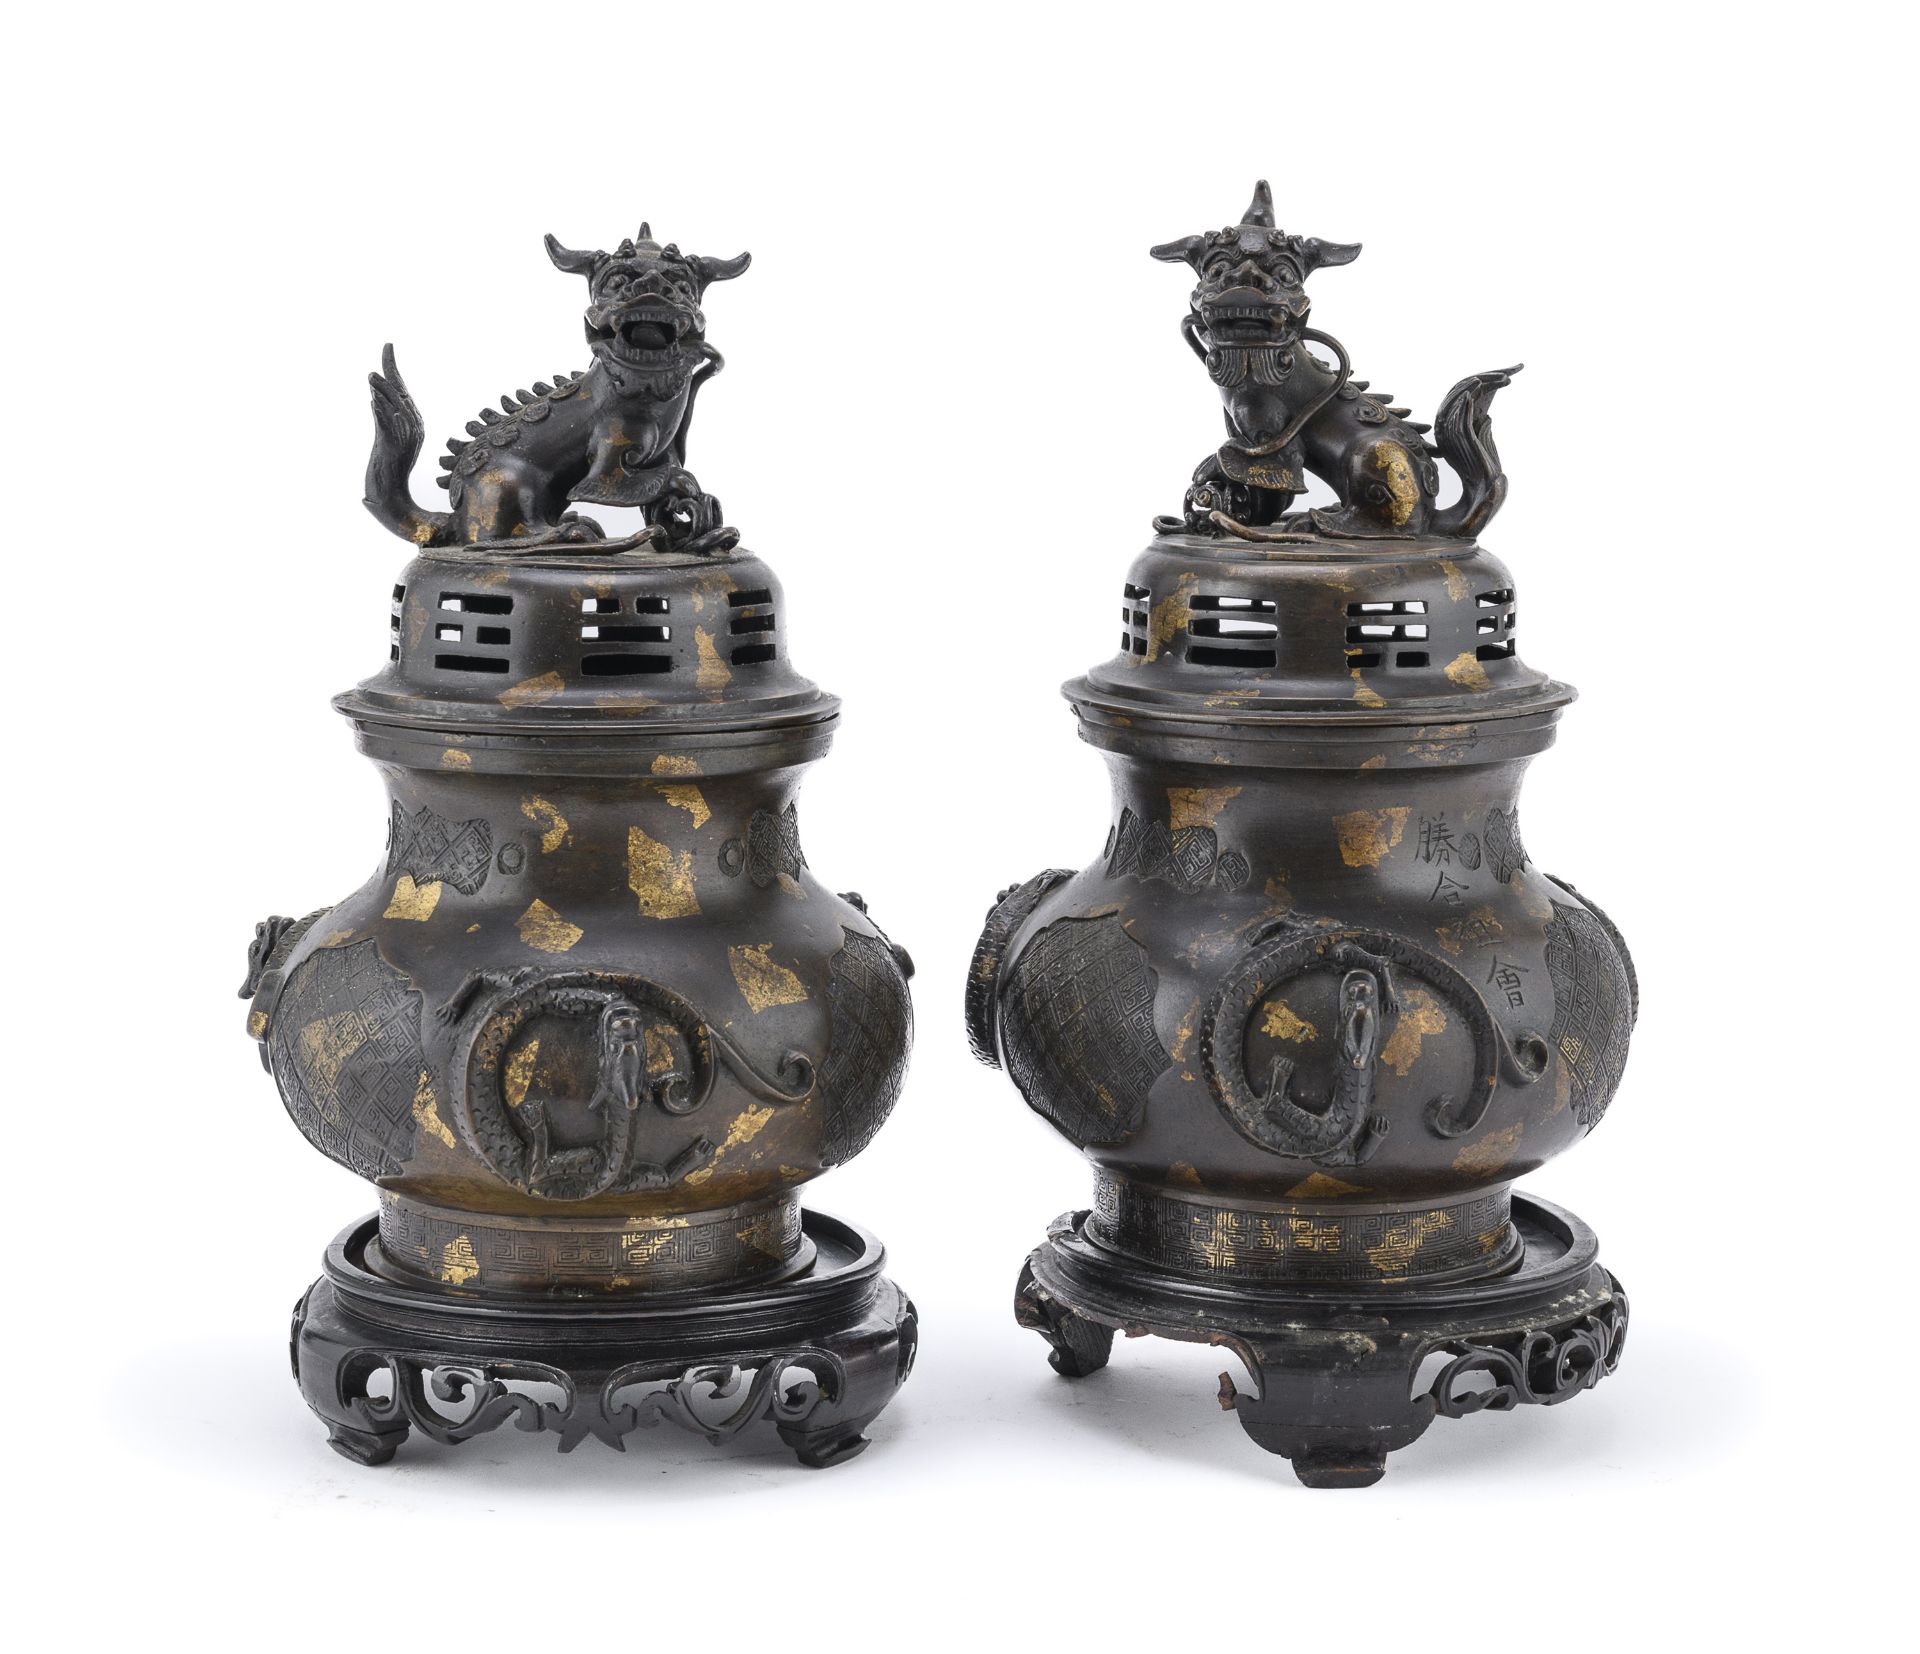 PAIR OF BRONZE CENSERS CHINA LATE 19TH EARLY 20TH CENTURY